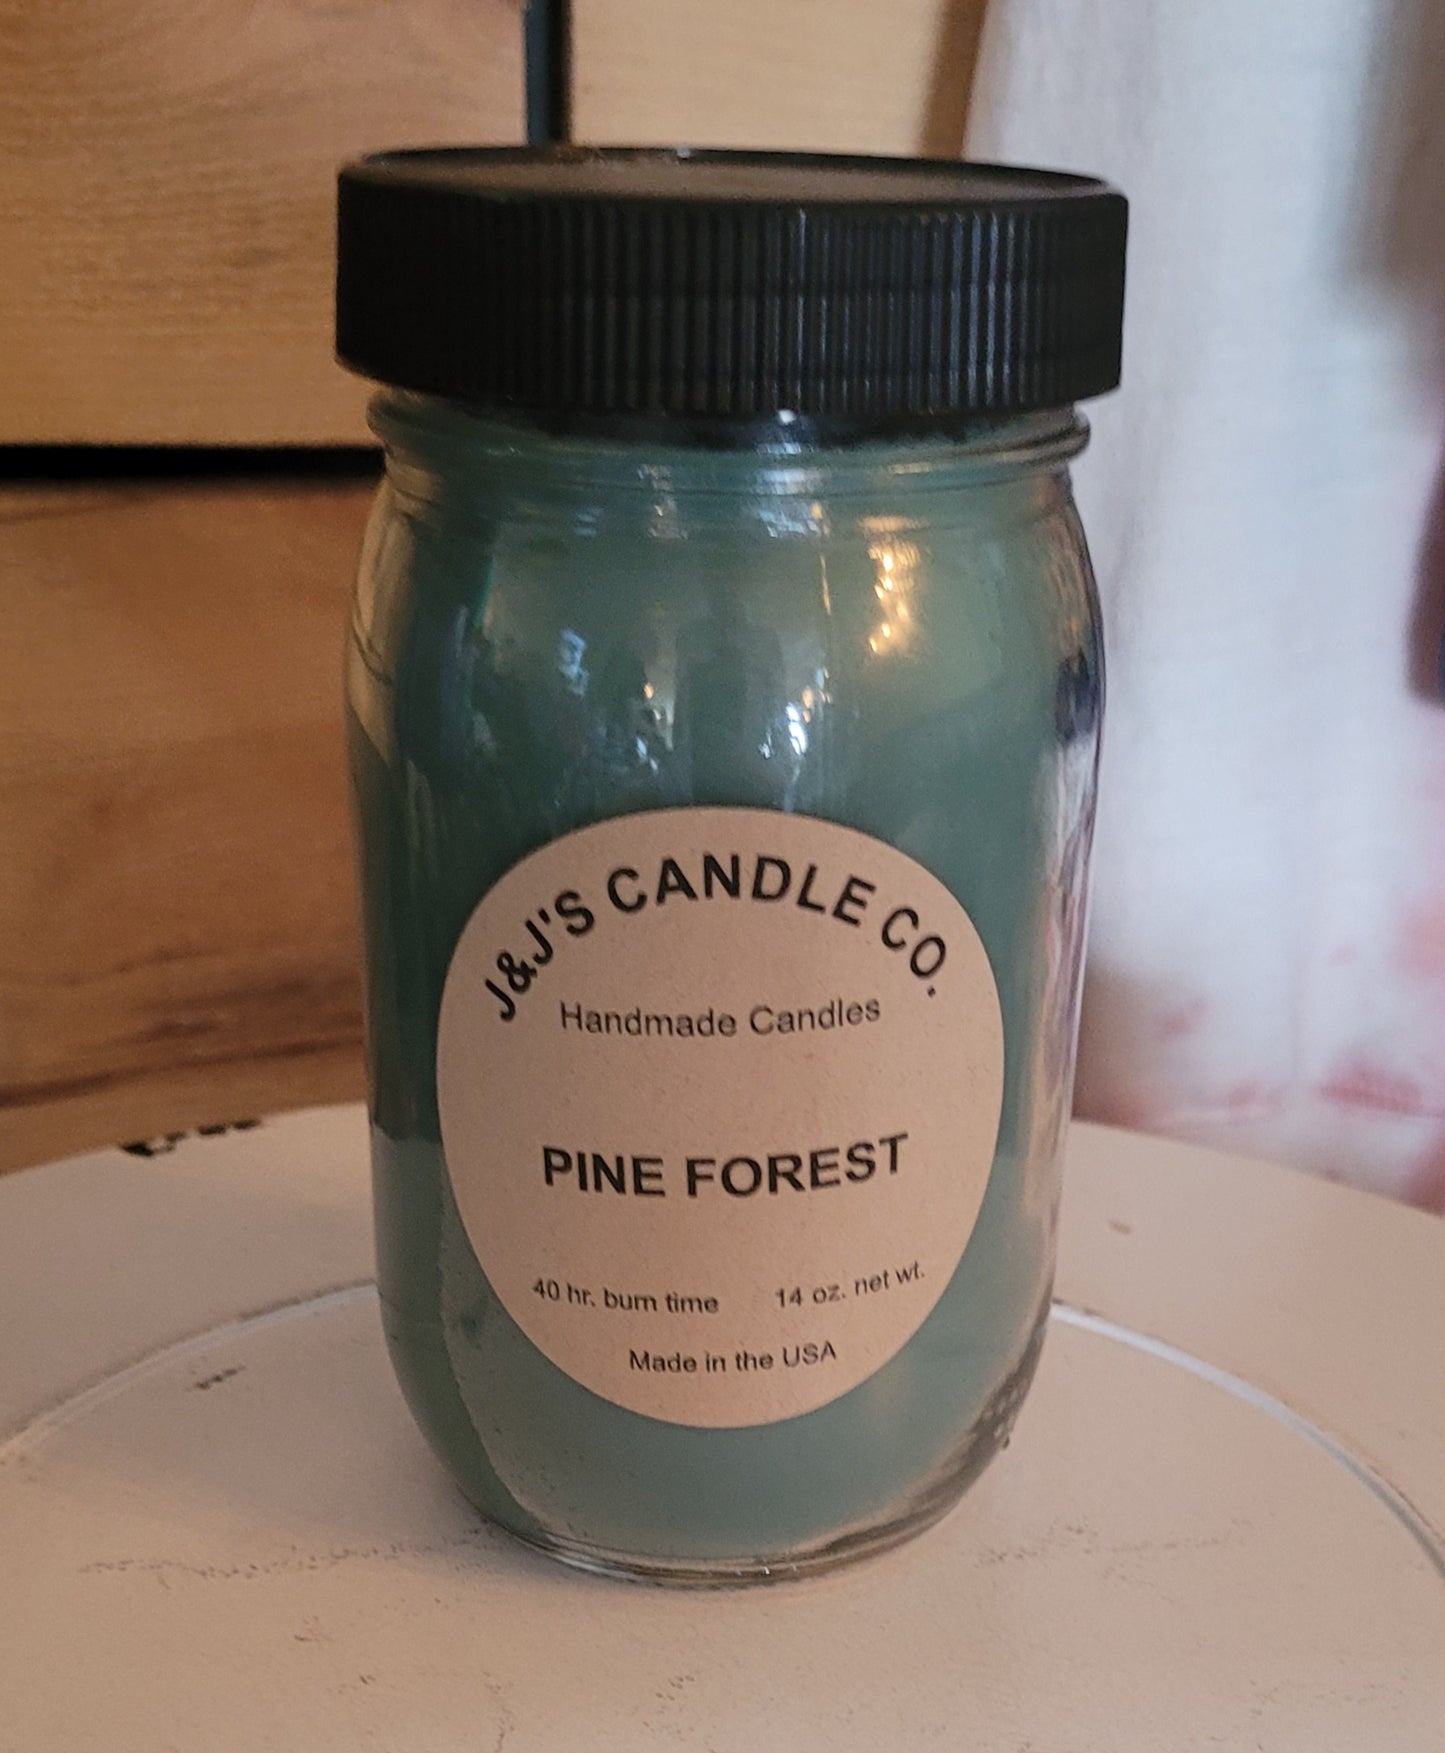 J&J's Candle Co. Pine Forest